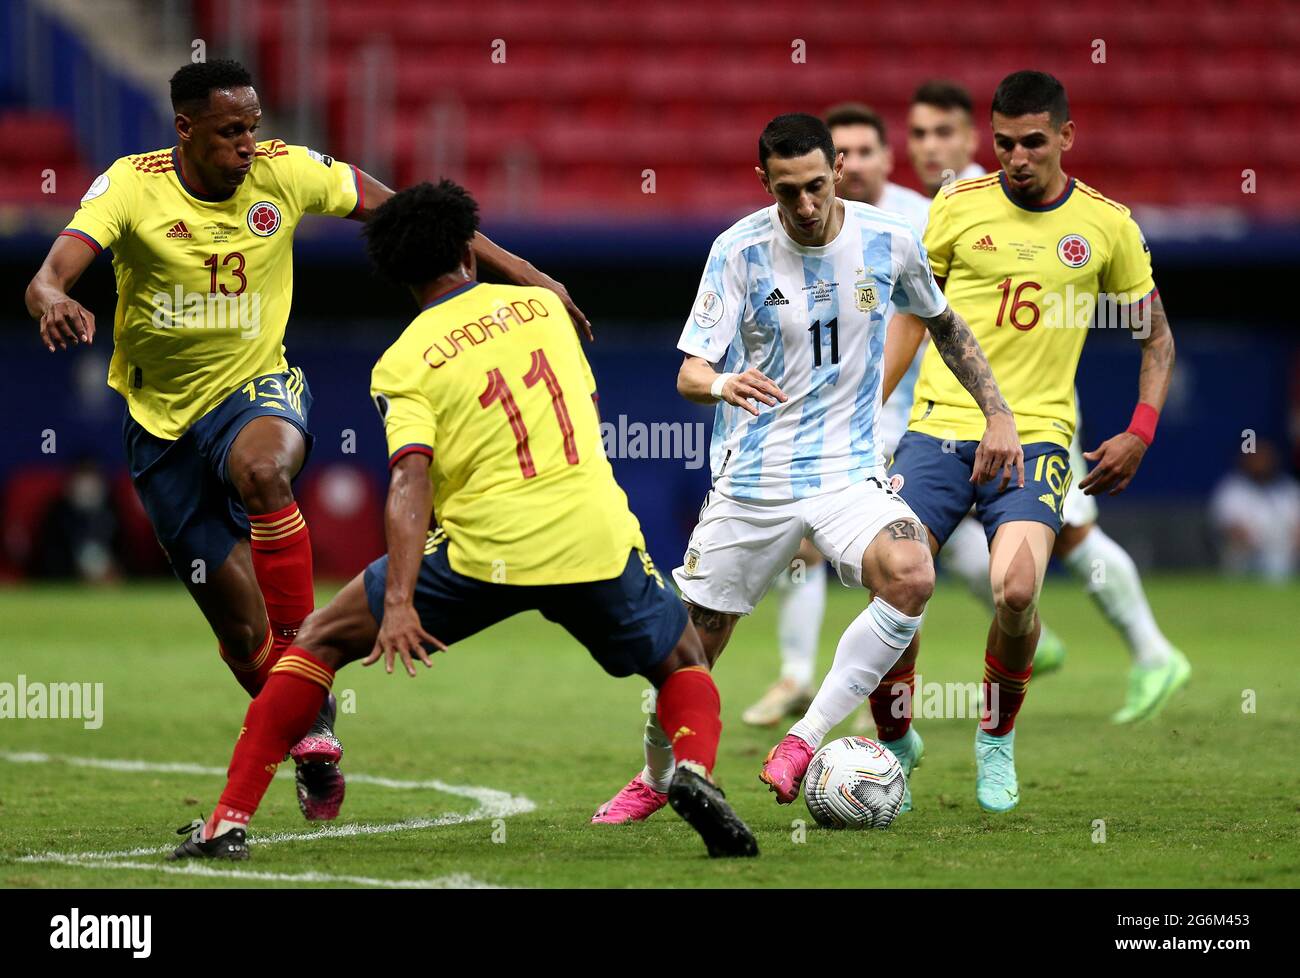 BRASILIA, BRAZIL - JULY 06: Angel Di Maria of Argentina competes for the ball with Yerry Mina ,Juan Cuadrado and Rafael Santos Borre of Colombia ,during the Semifinal match between Argentina and Colombia as part of Conmebol Copa America Brazil 2021 at Mane Garrincha Stadium on July 6, 2021 in Brasilia, Brazil. (MB Media) Stock Photo